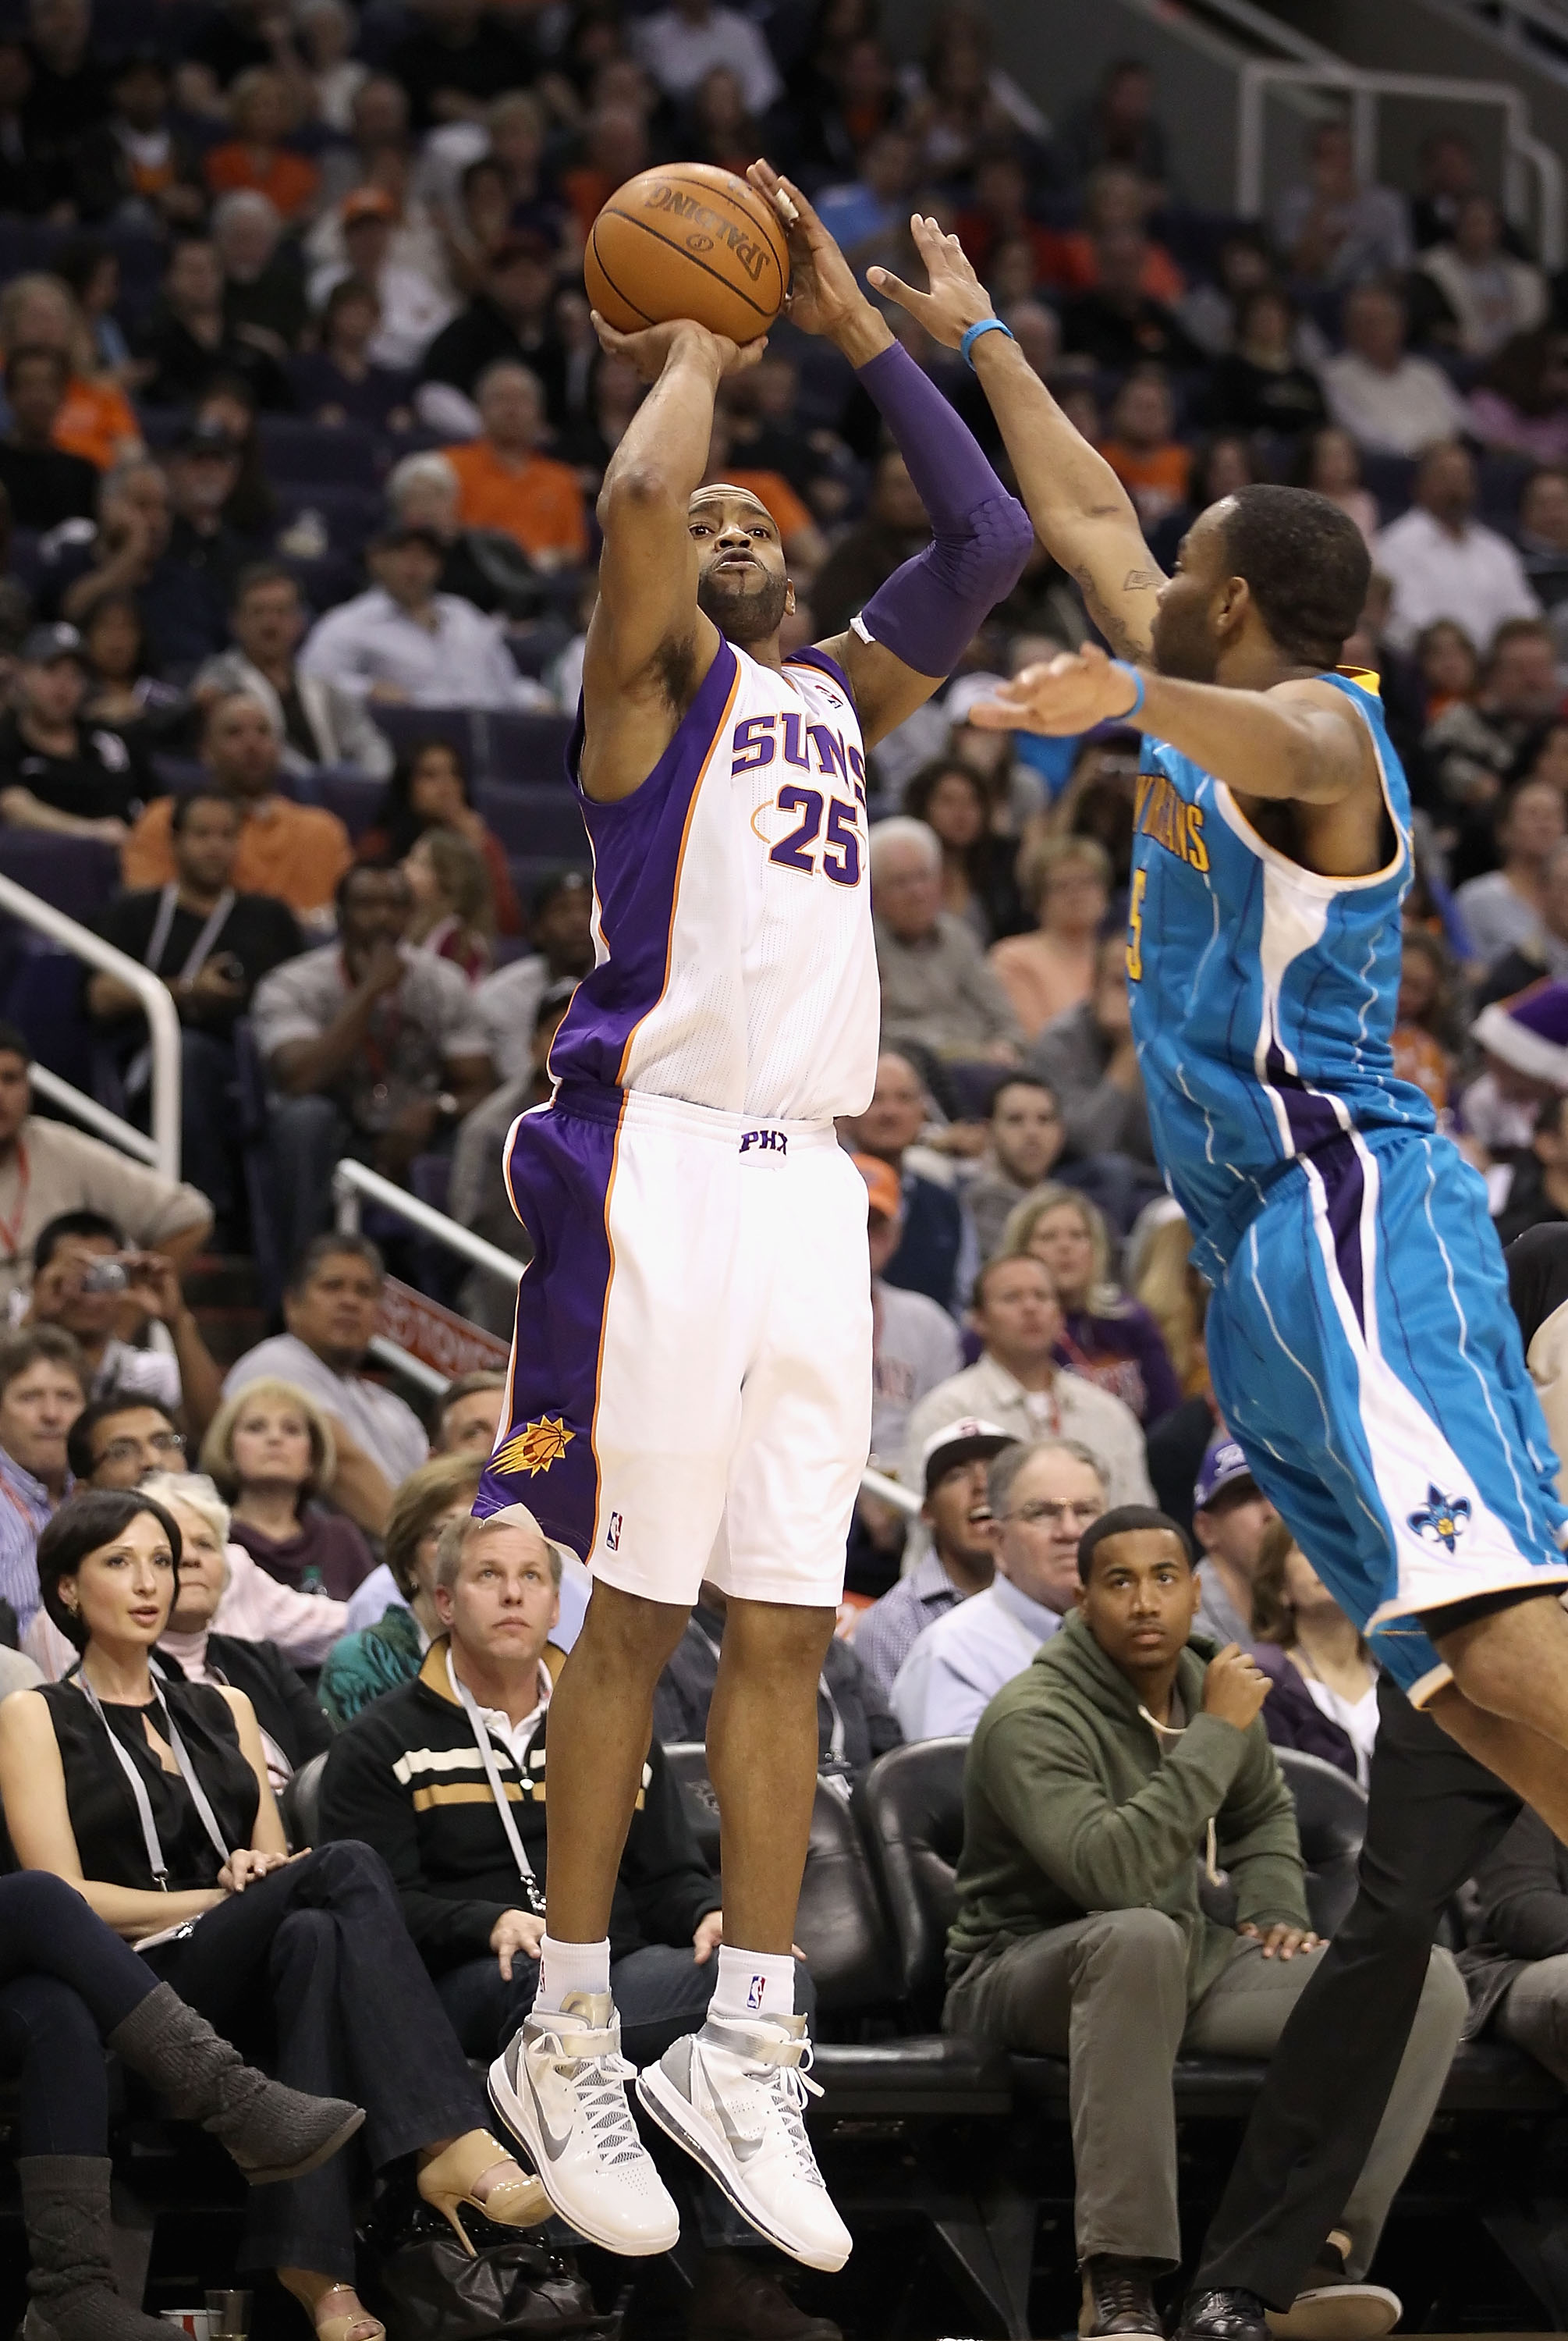 PHOENIX, AZ - JANUARY 30:  Vince Carter #25 of the Phoenix Suns attempts a three point shot over Marcus Thornton #5 of the New Orleans Hornets during the NBA game at US Airways Center on January 30, 2011 in Phoenix, Arizona. The Suns defeated the Hornets